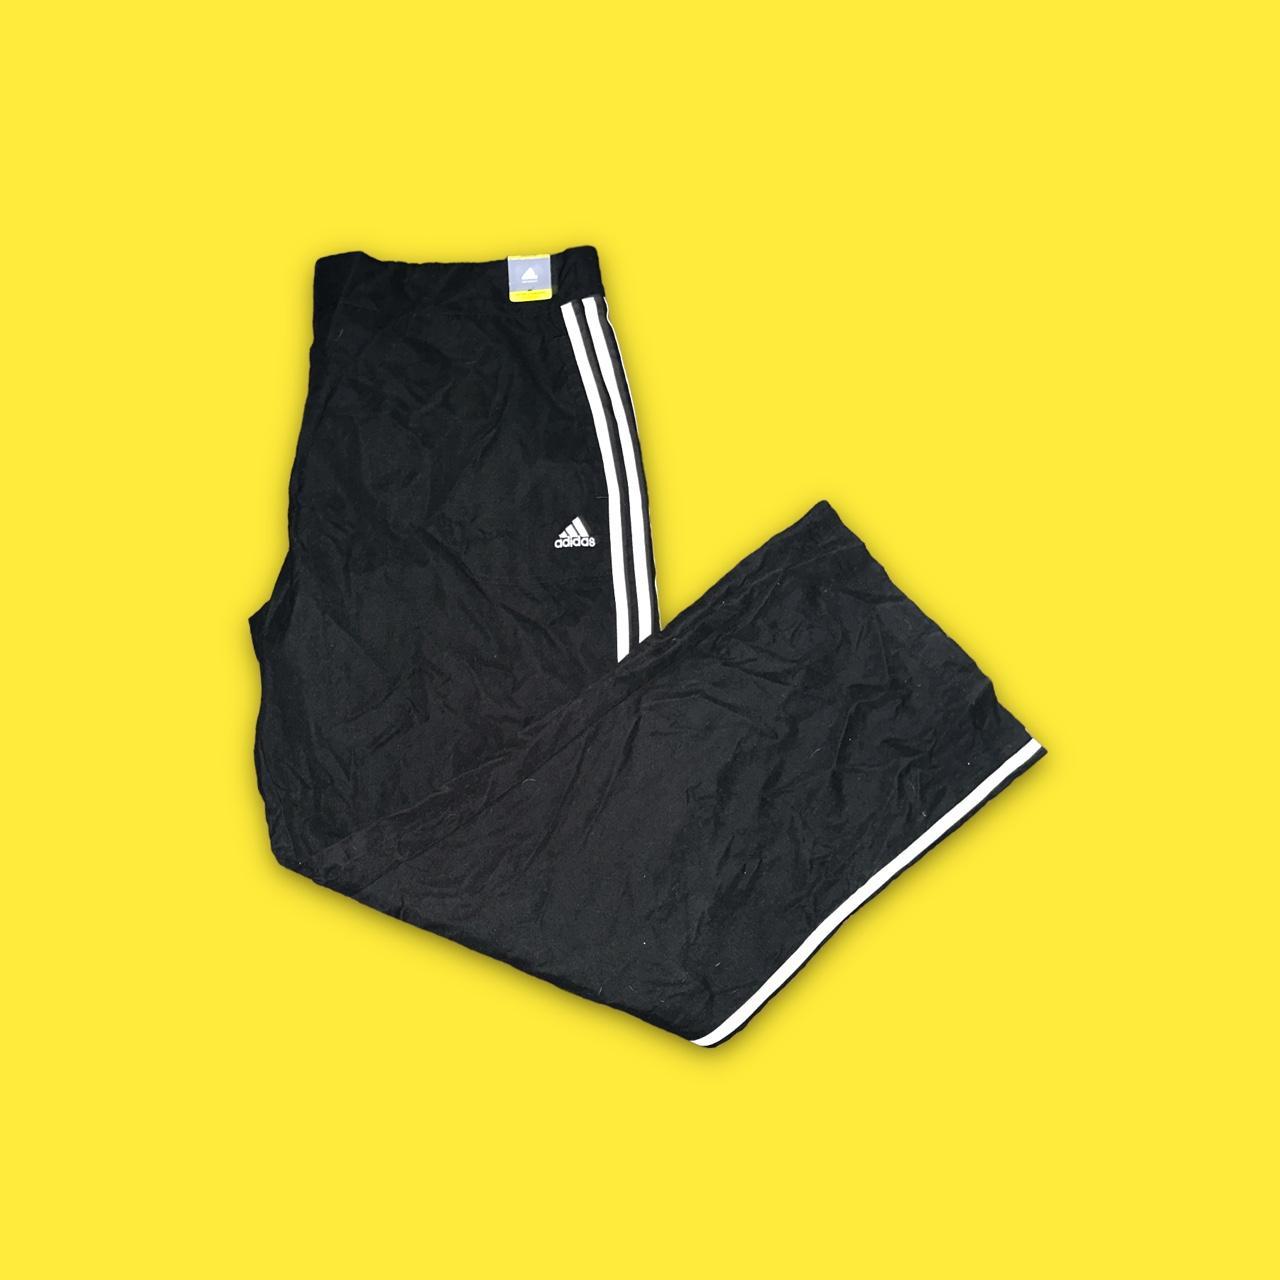 Adidas Men's Black and White Joggers-tracksuits